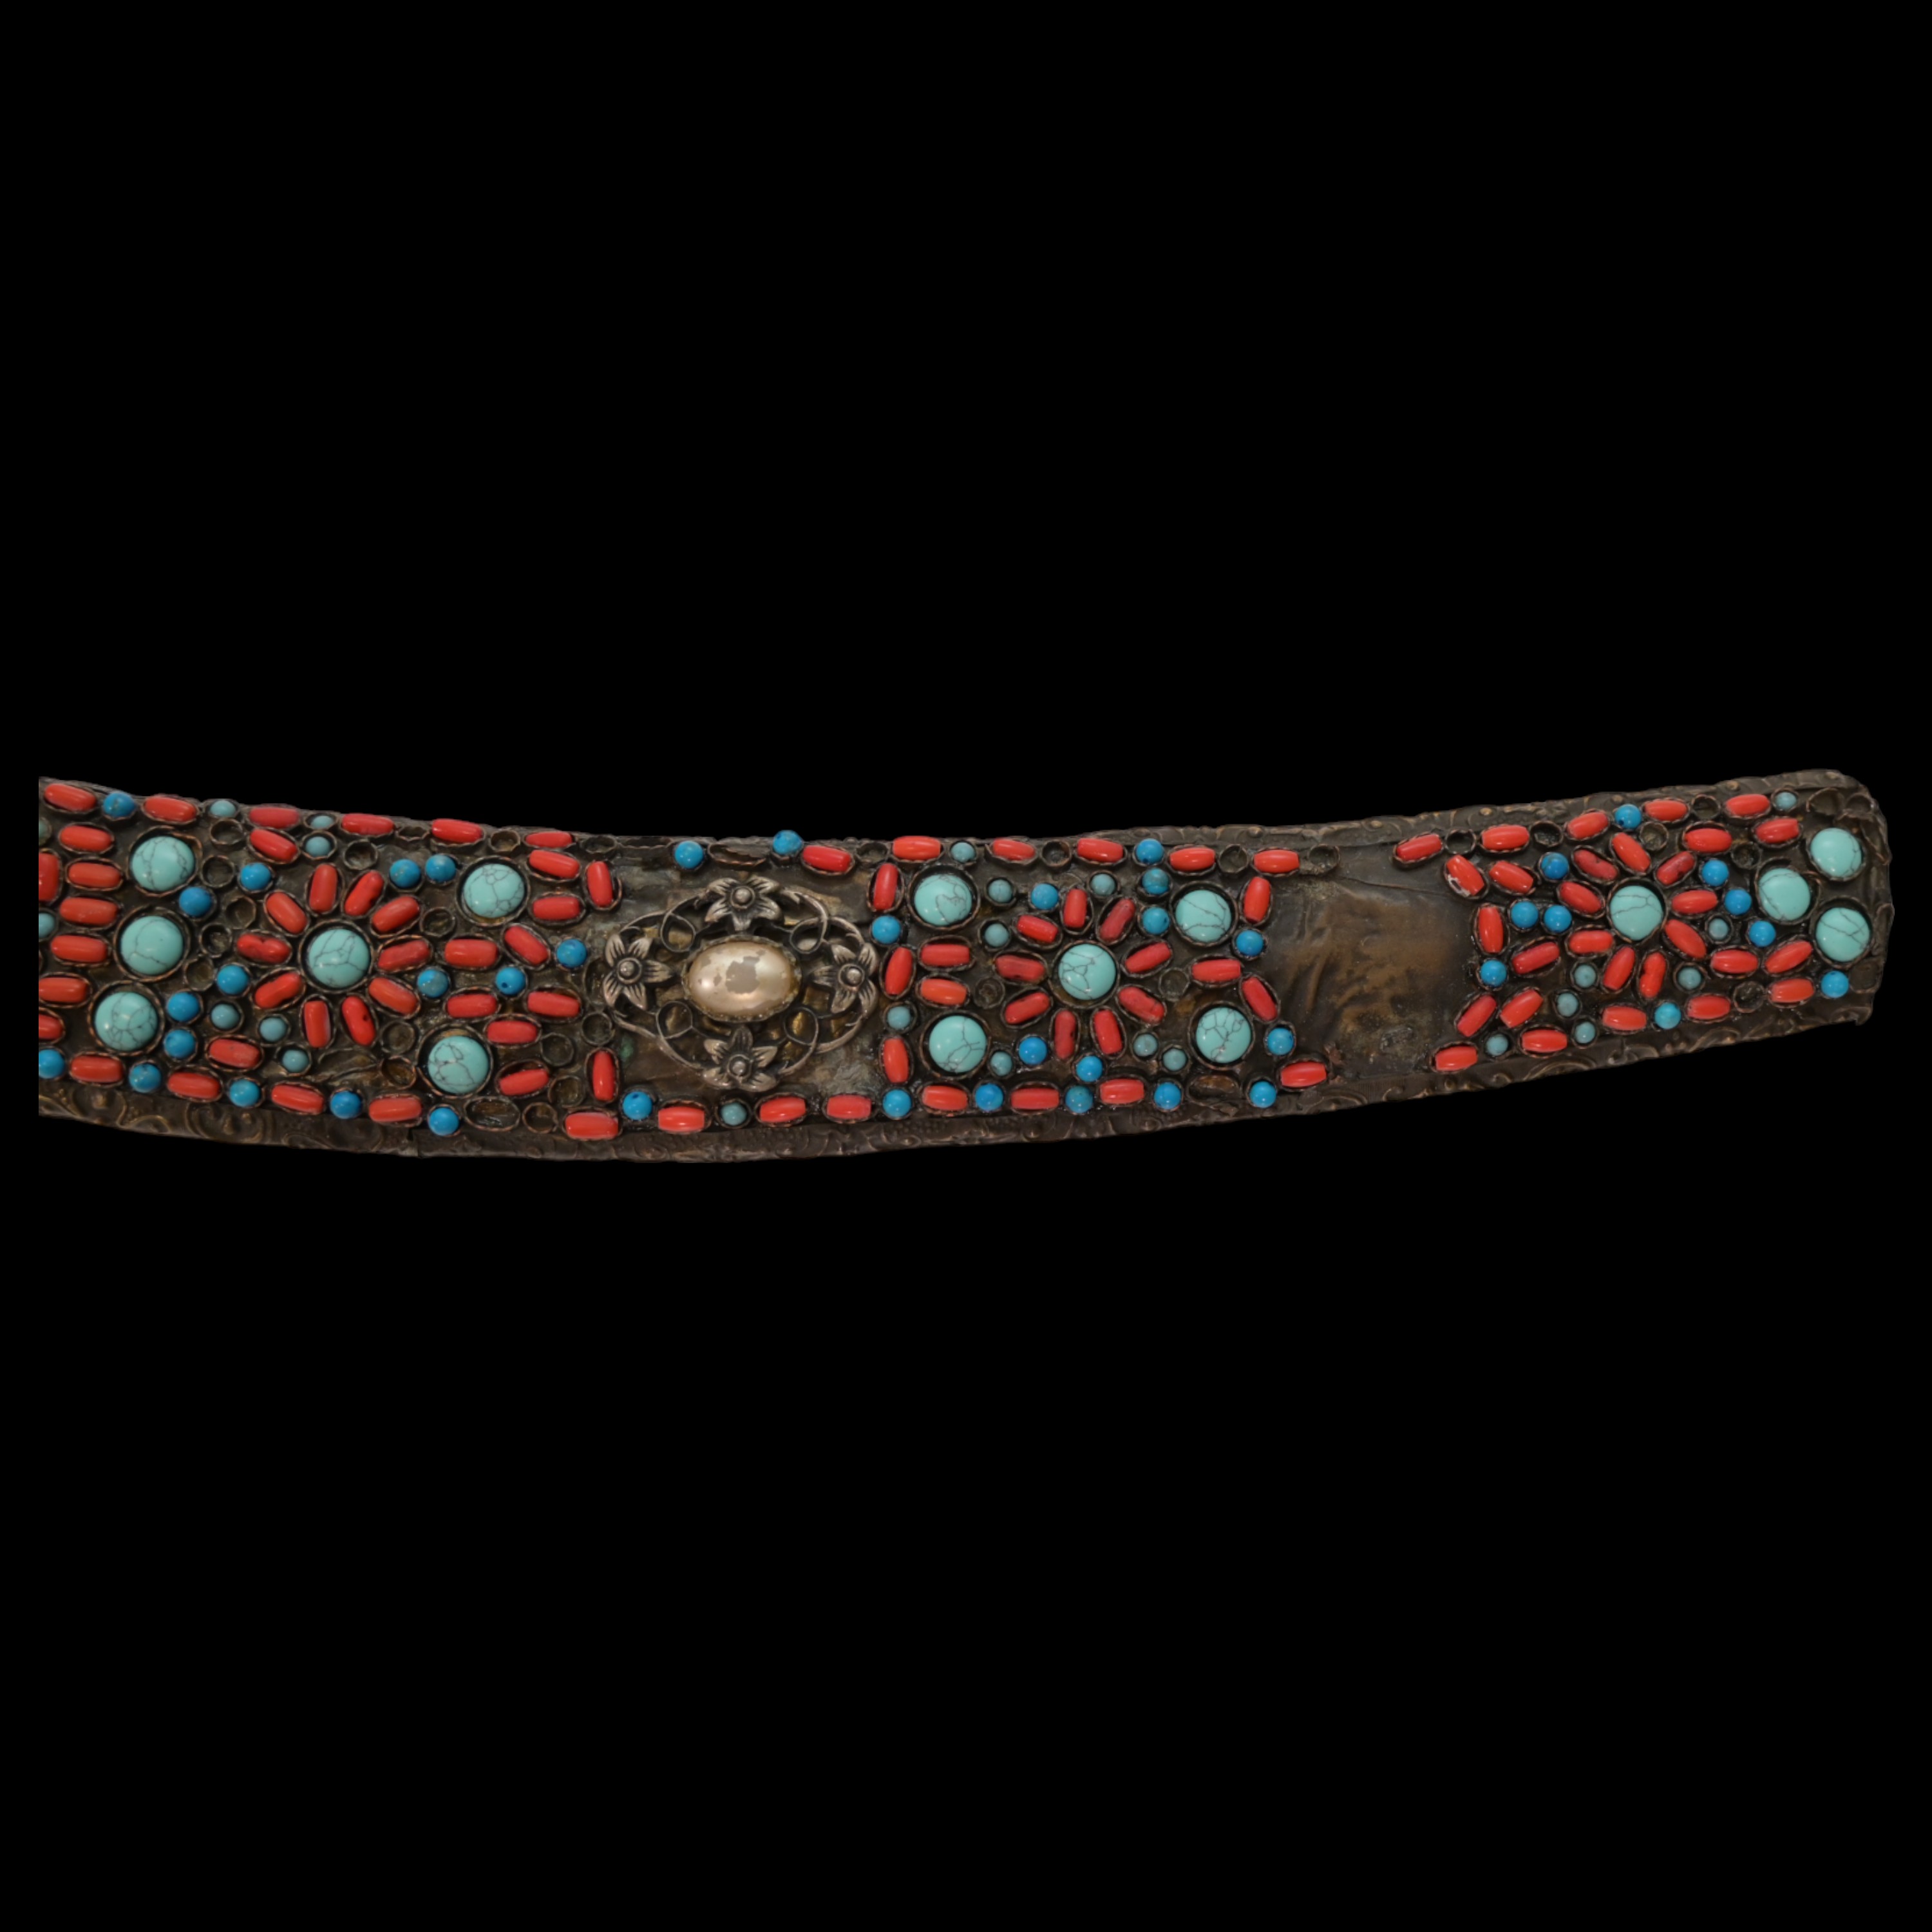 Rare Ottoman sword, Kilij, Pala, decorated with corals and turquoise, Turkey, Trabzon, around 1800. - Image 10 of 31